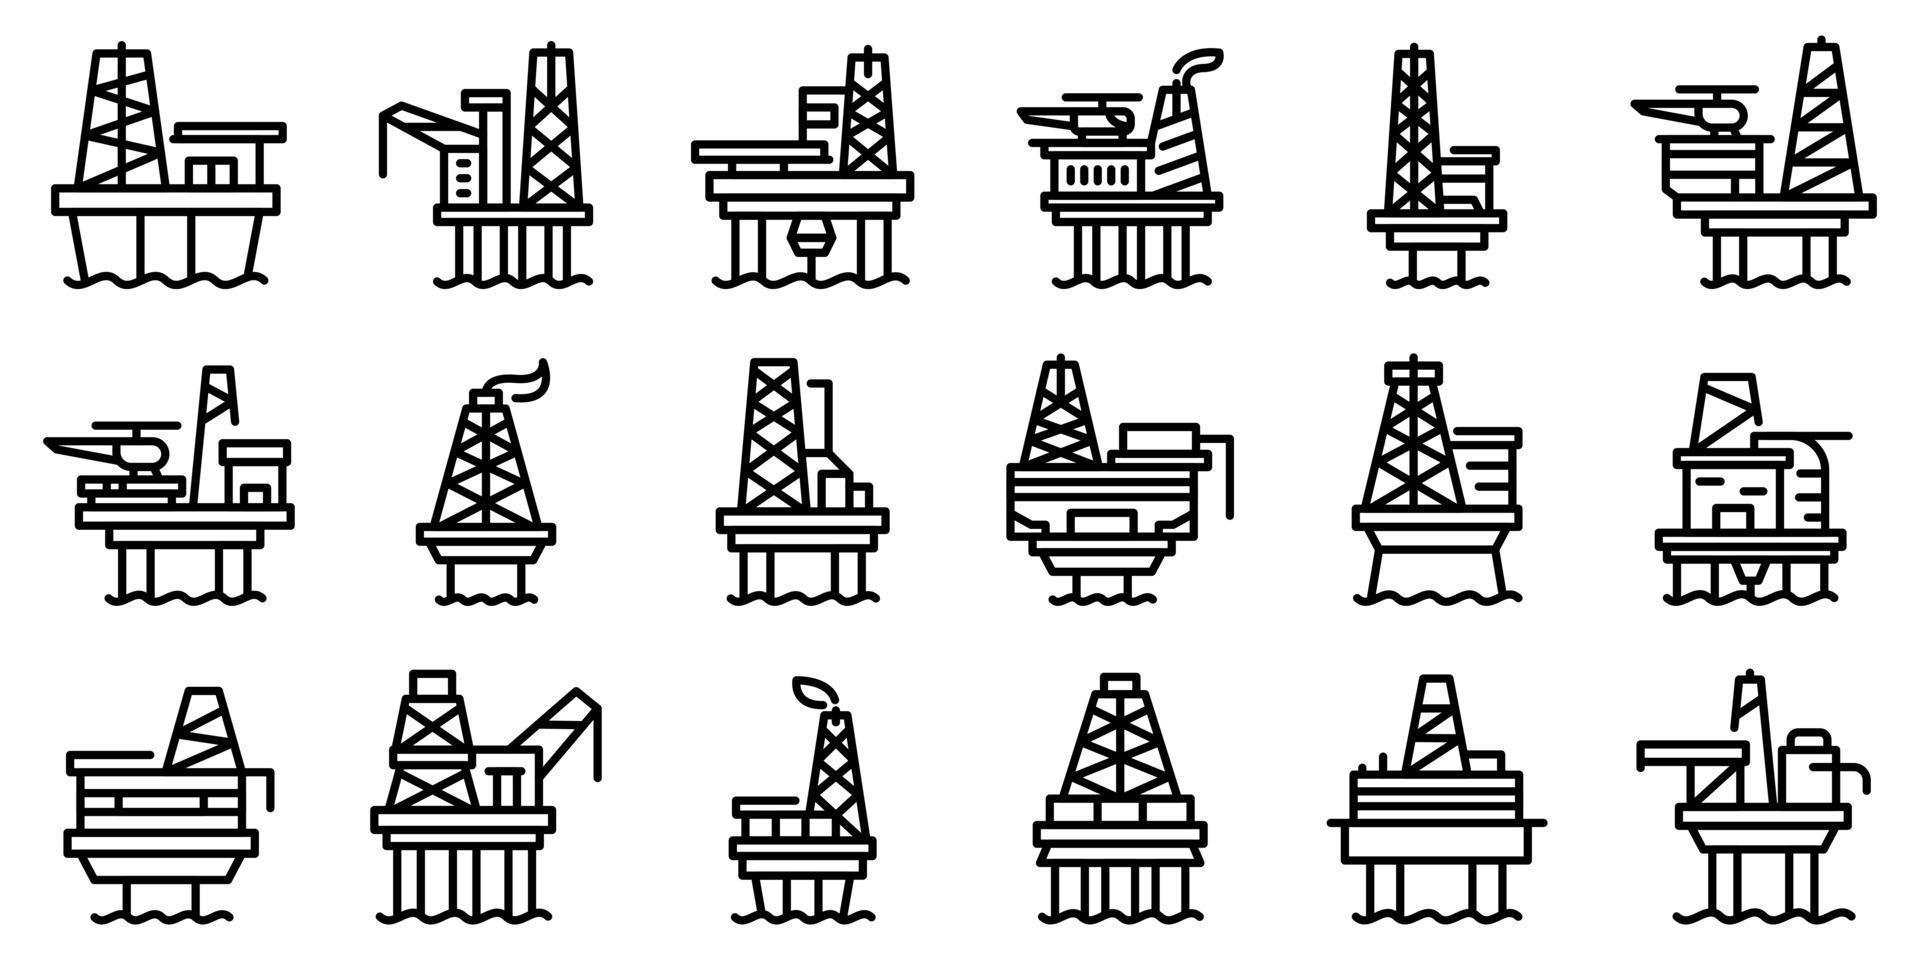 Sea drilling rig icons set, outline style vector